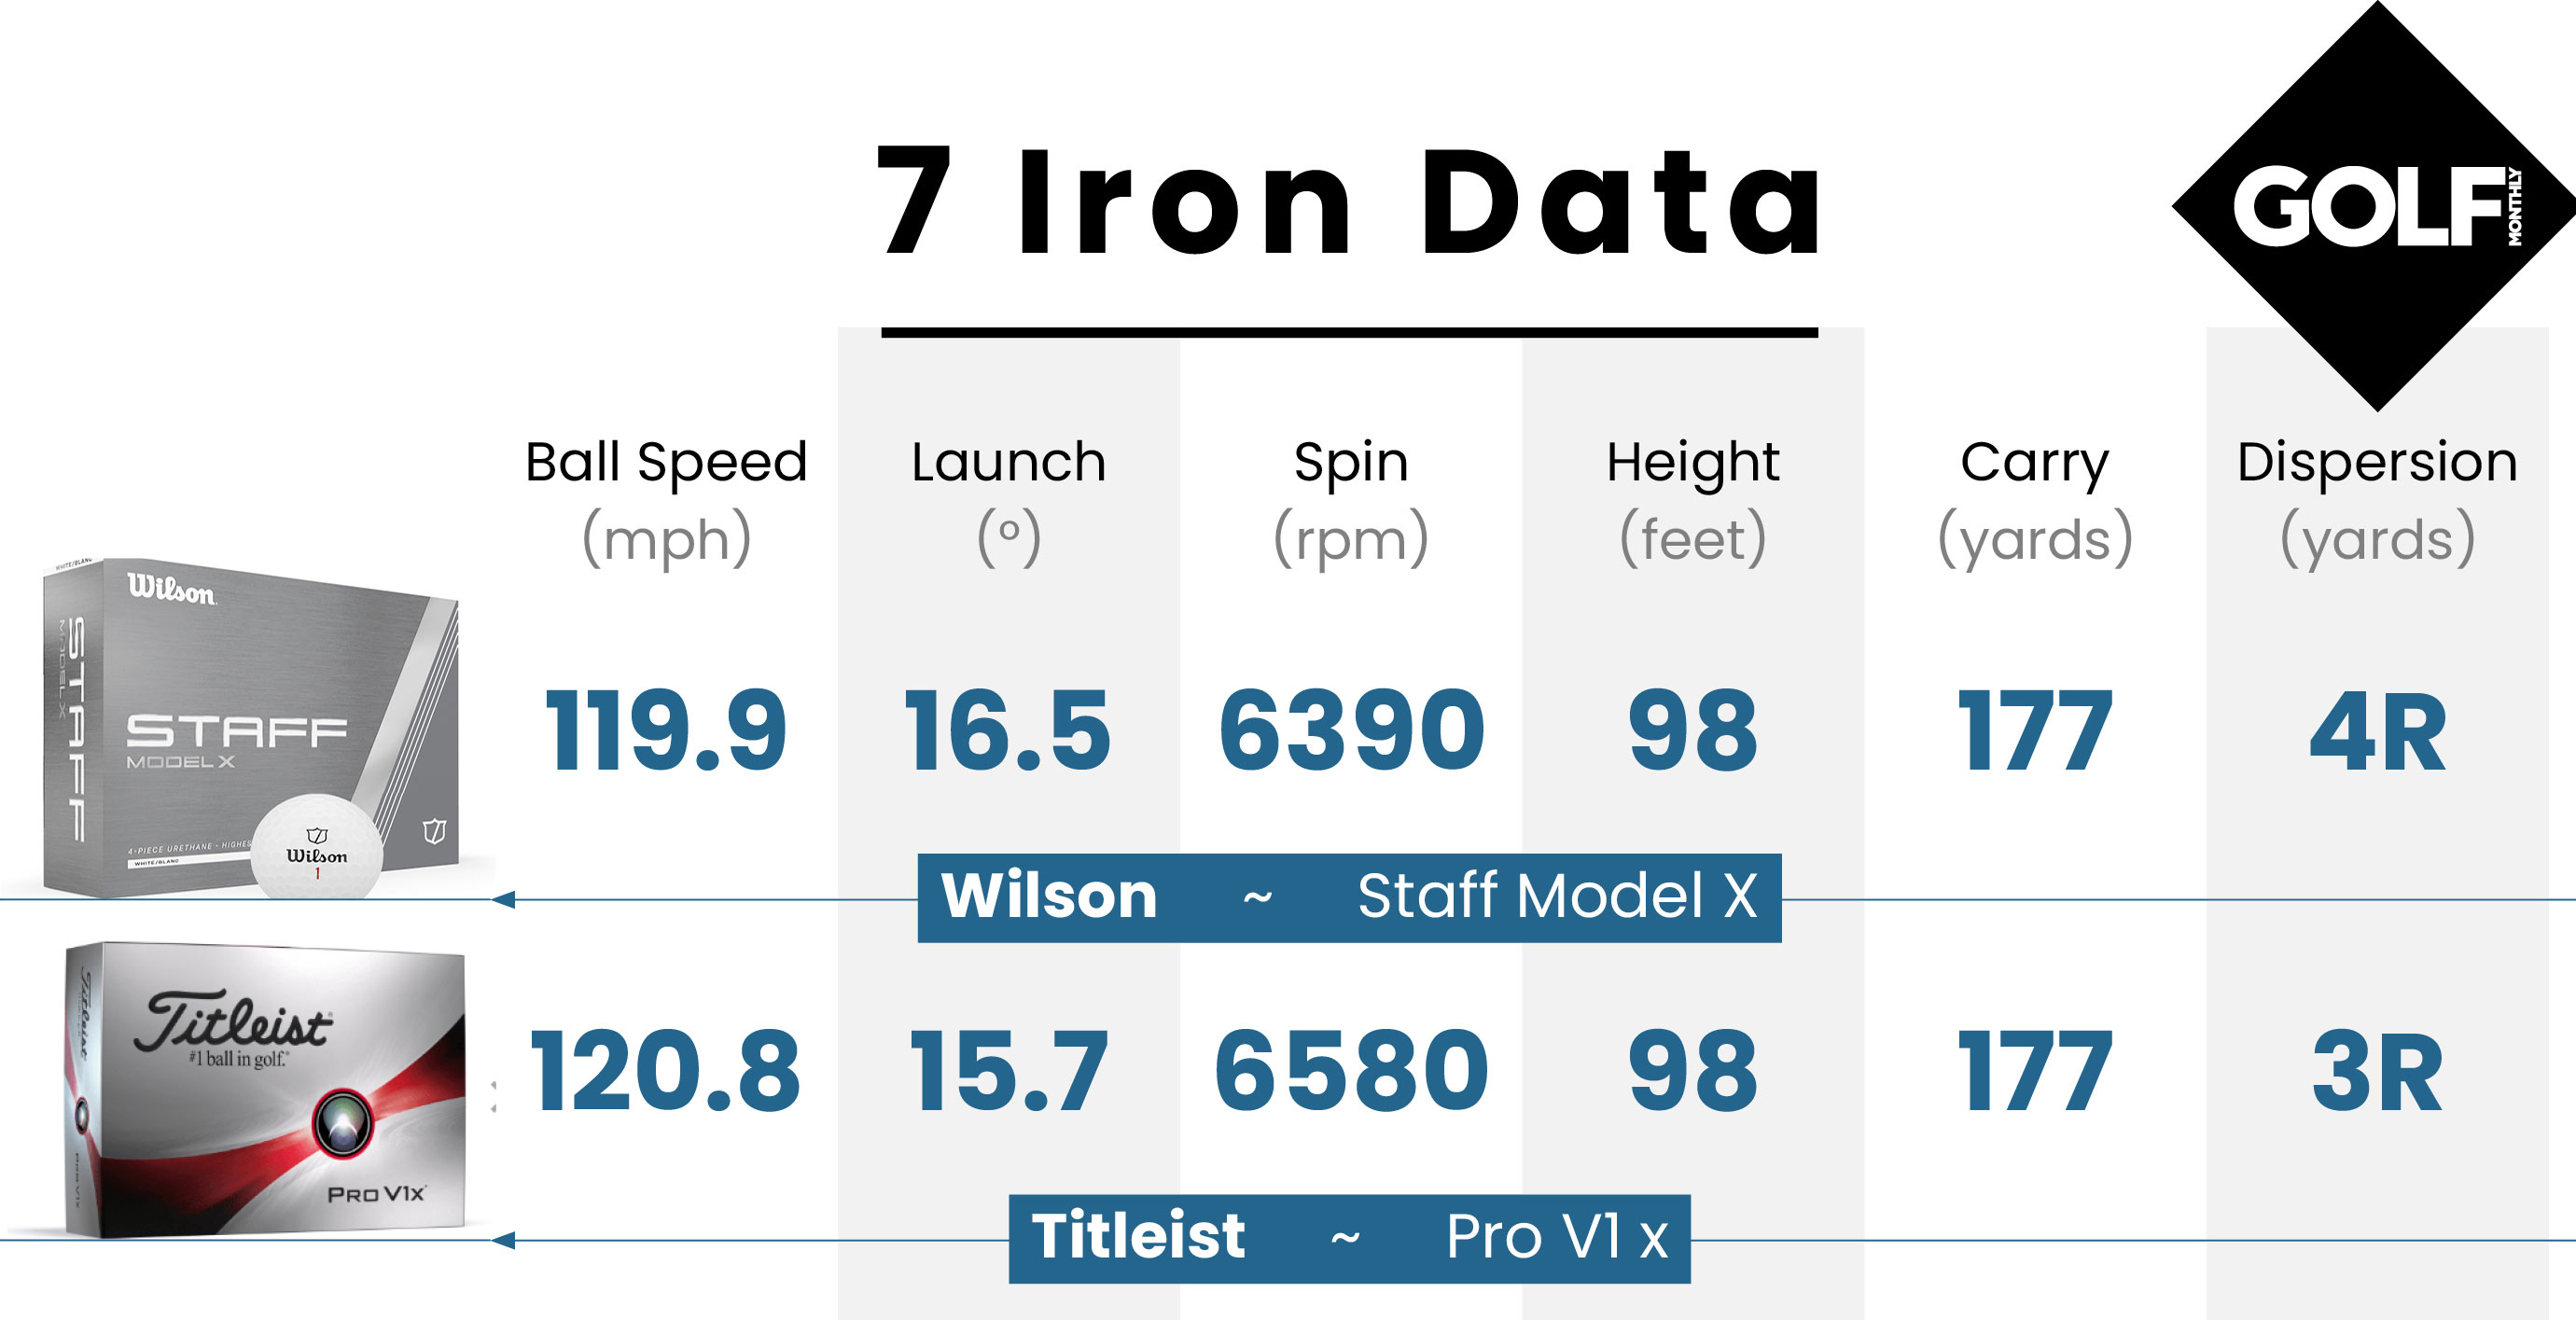 7 iron data table for the Wilson Staff Model X Golf Ball